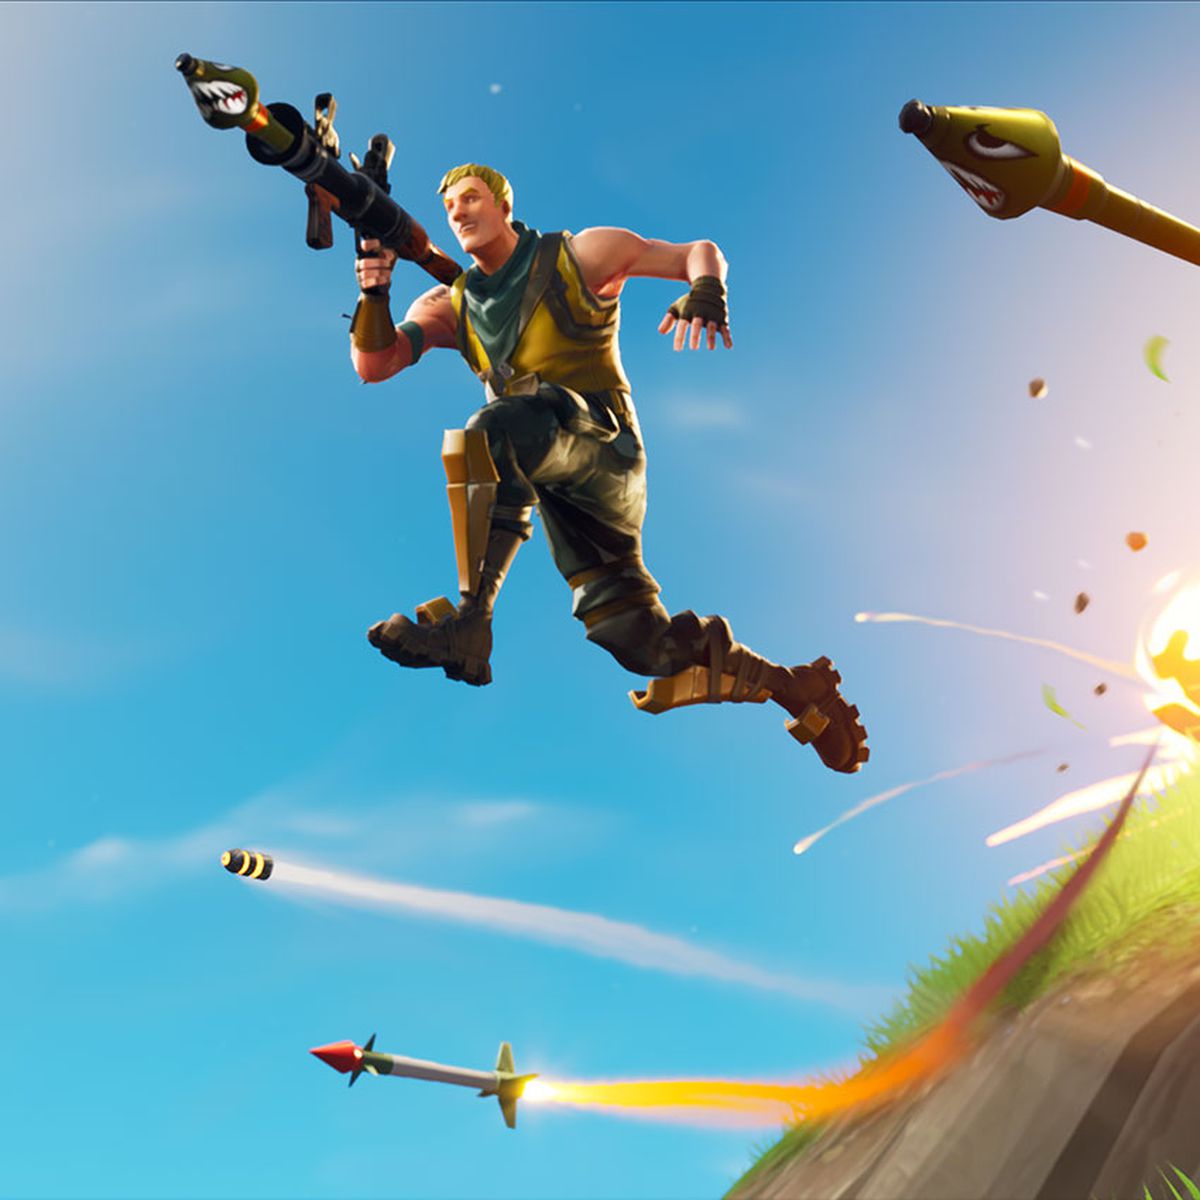 30% store tax is a high cost,” says Sweeney as Fortnite skips Google Play